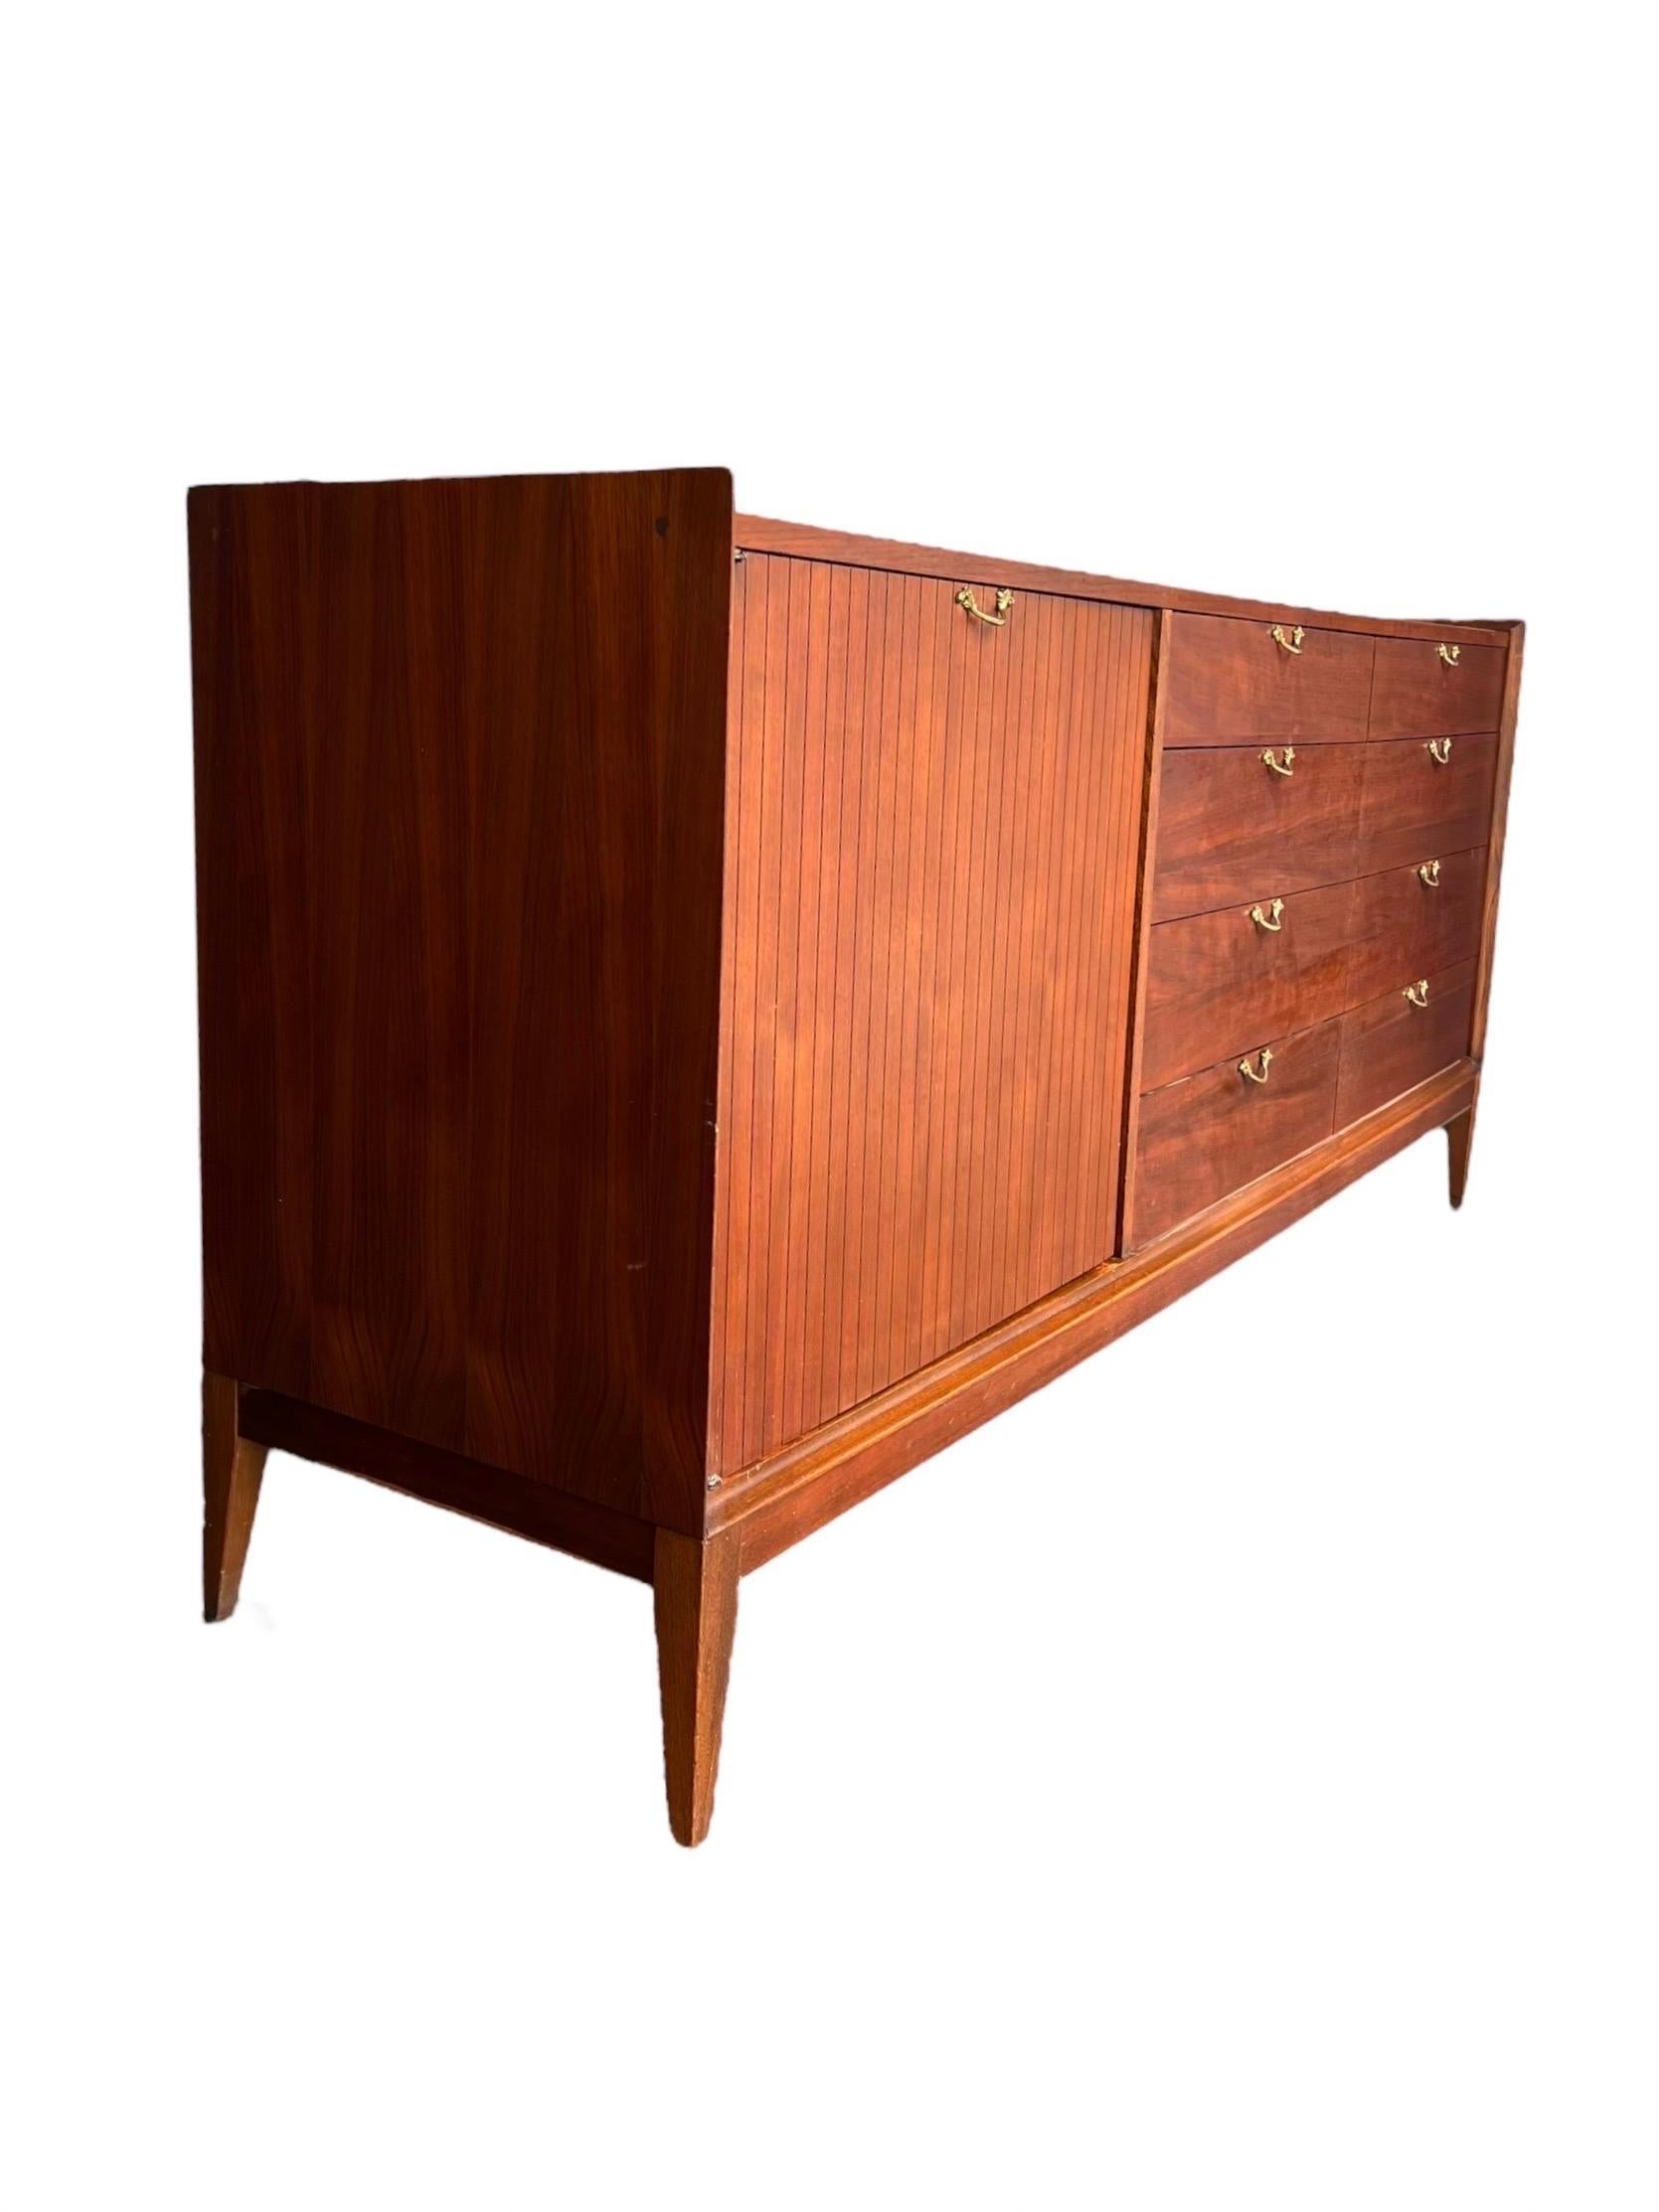 Vintage Mid-Century Modern 12 Drawer Dresser Dovetail Drawers In Good Condition For Sale In Seattle, WA